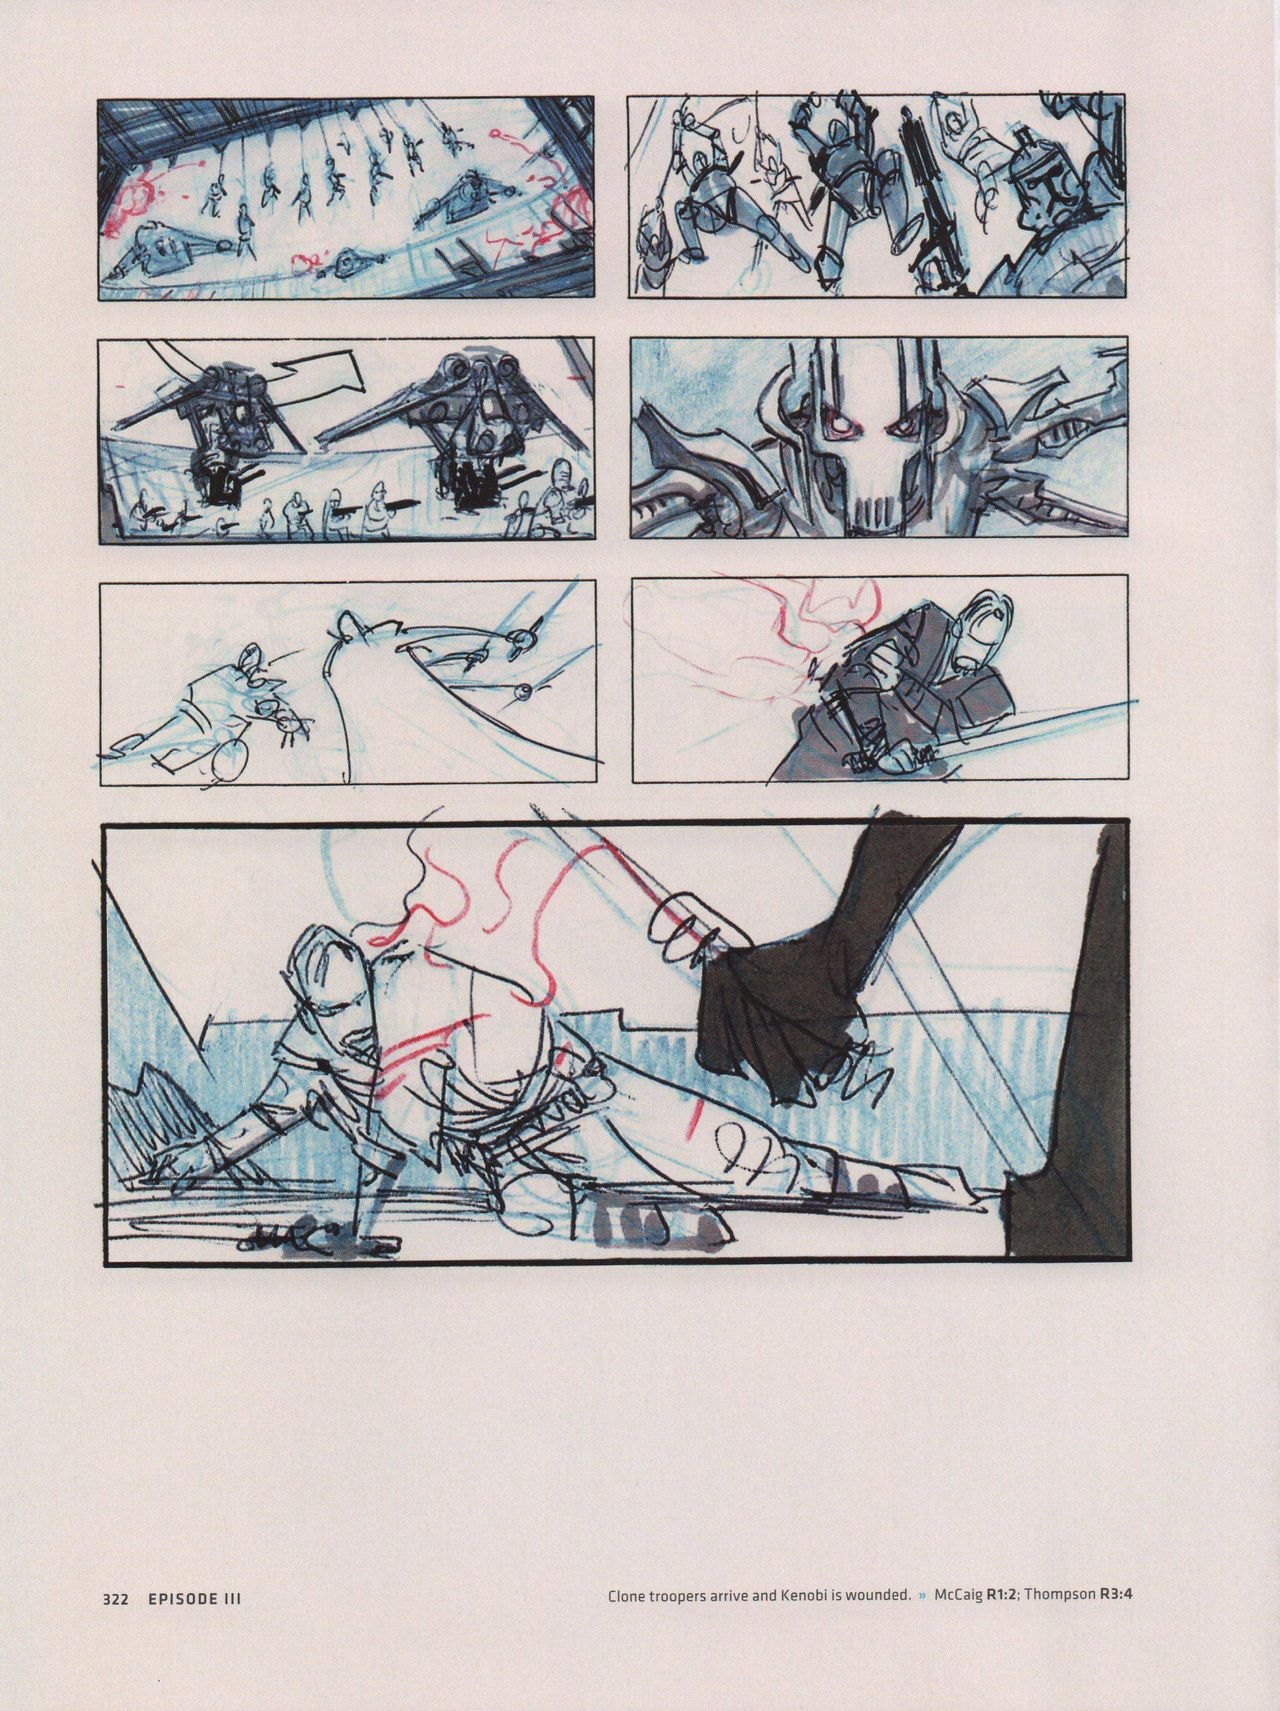 Star Wars Storyboards - The Prequel Trilogy 326